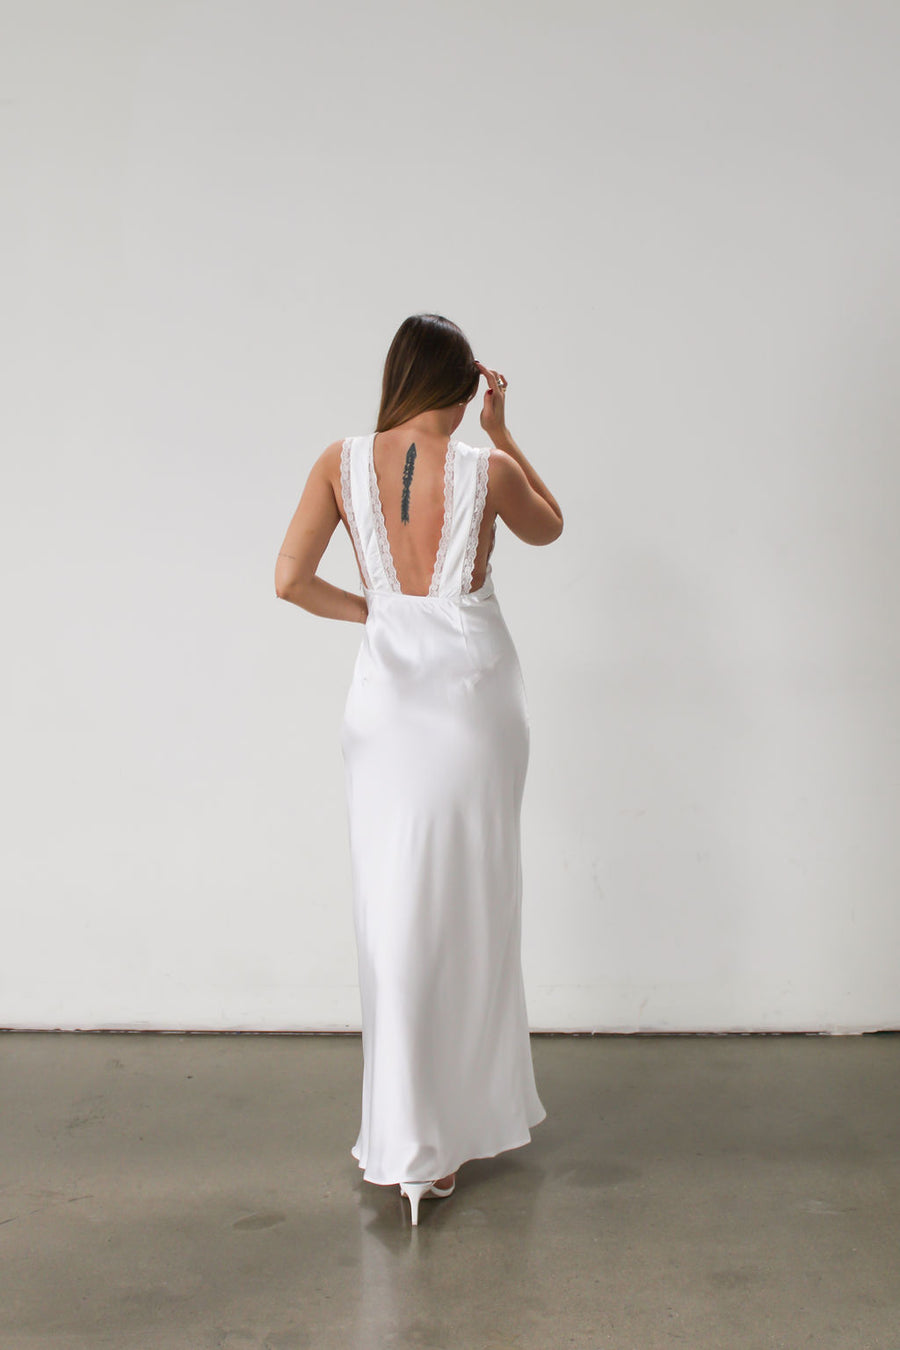 The Main Event Maxi Dress - ONLINE EXCLUSIVE